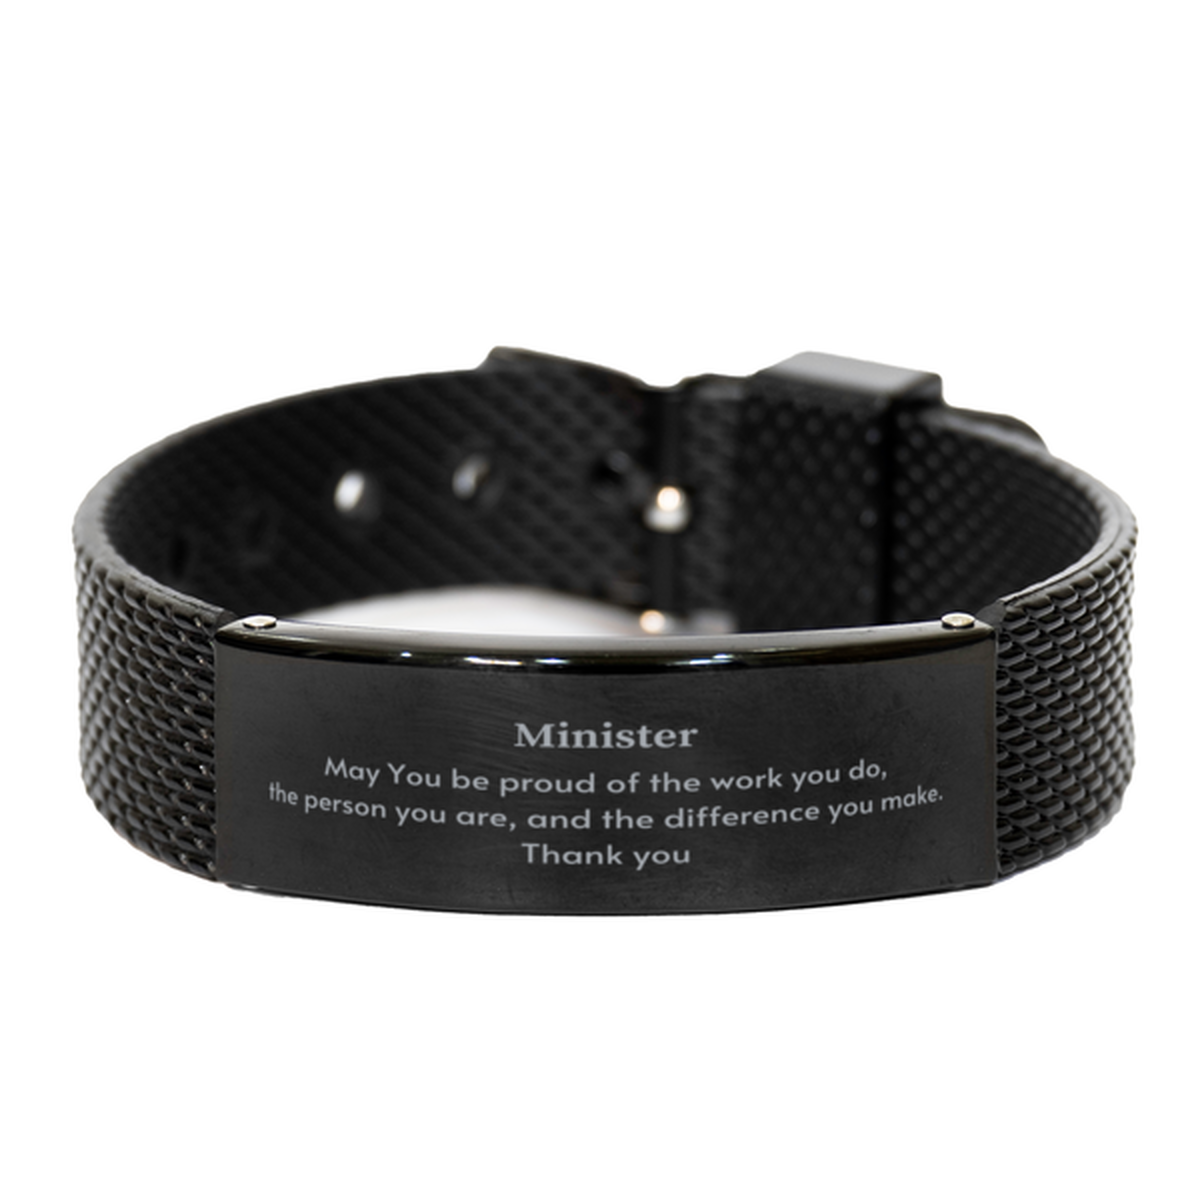 Heartwarming Black Shark Mesh Bracelet Retirement Coworkers Gifts for Minister, Minister May You be proud of the work you do, the person you are Gifts for Boss Men Women Friends